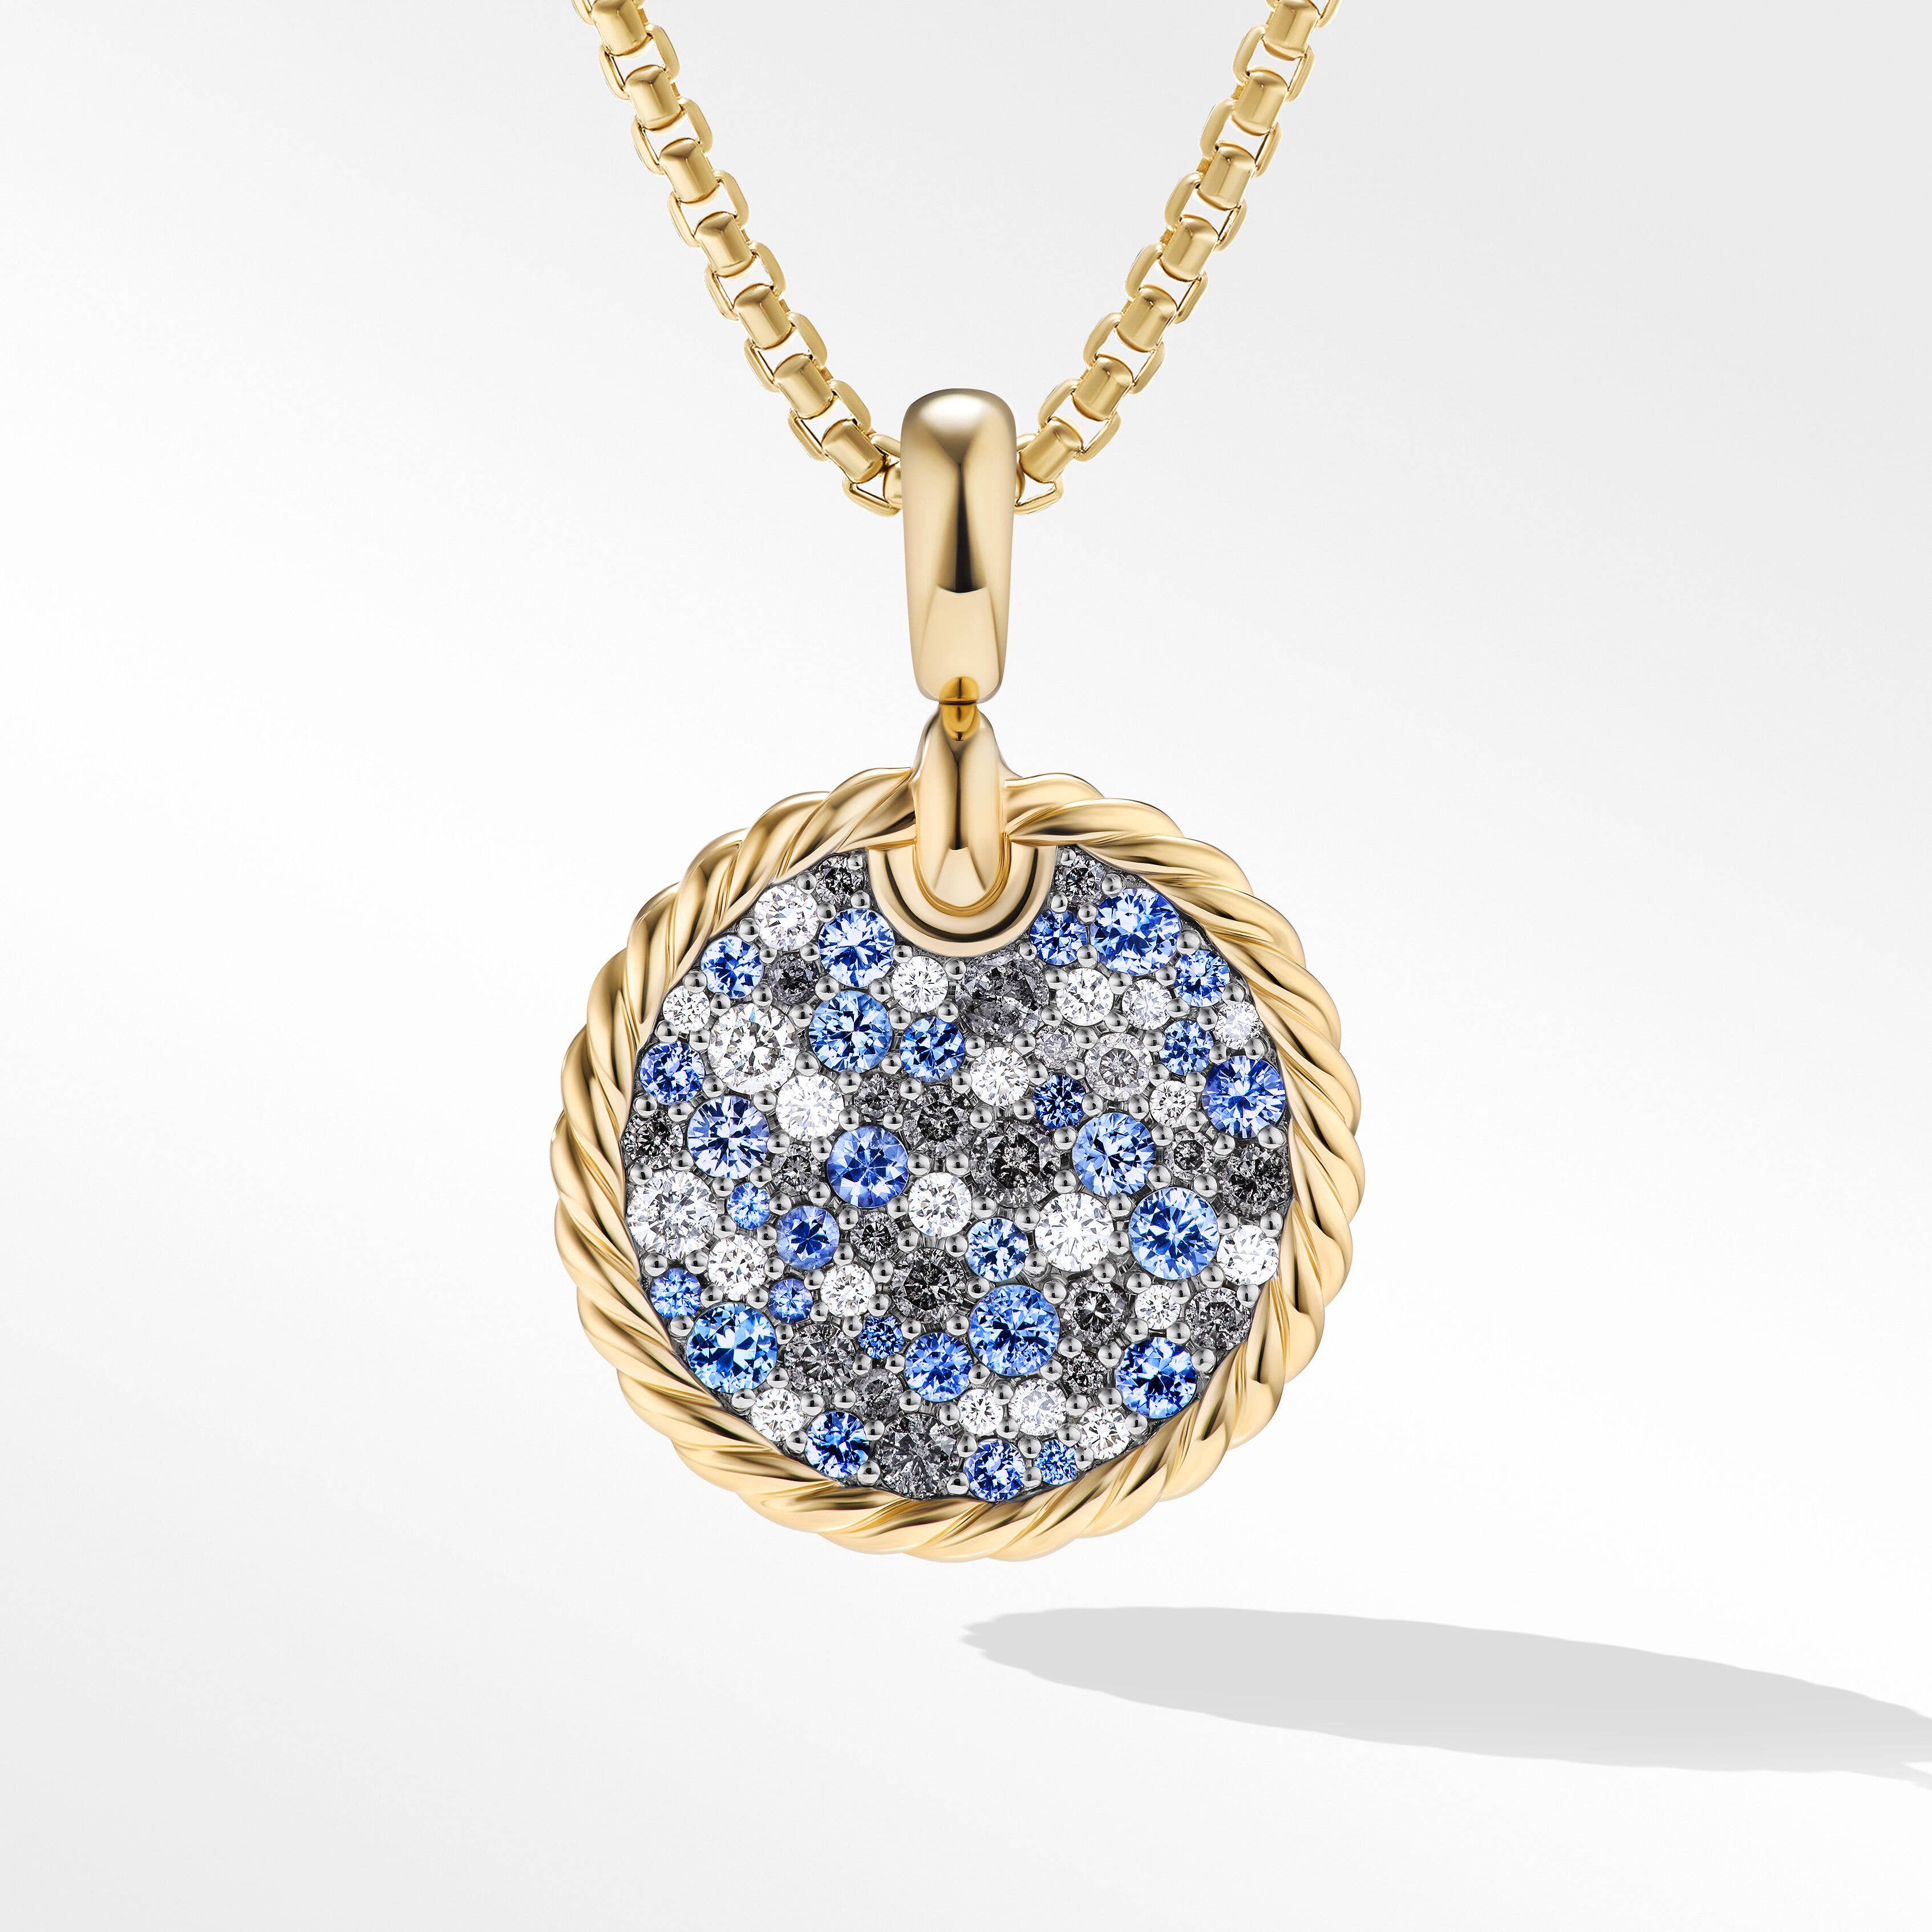 DY Elements® Air Pendant in 18K Yellow Gold with Pavé Diamonds and Blue Sapphires